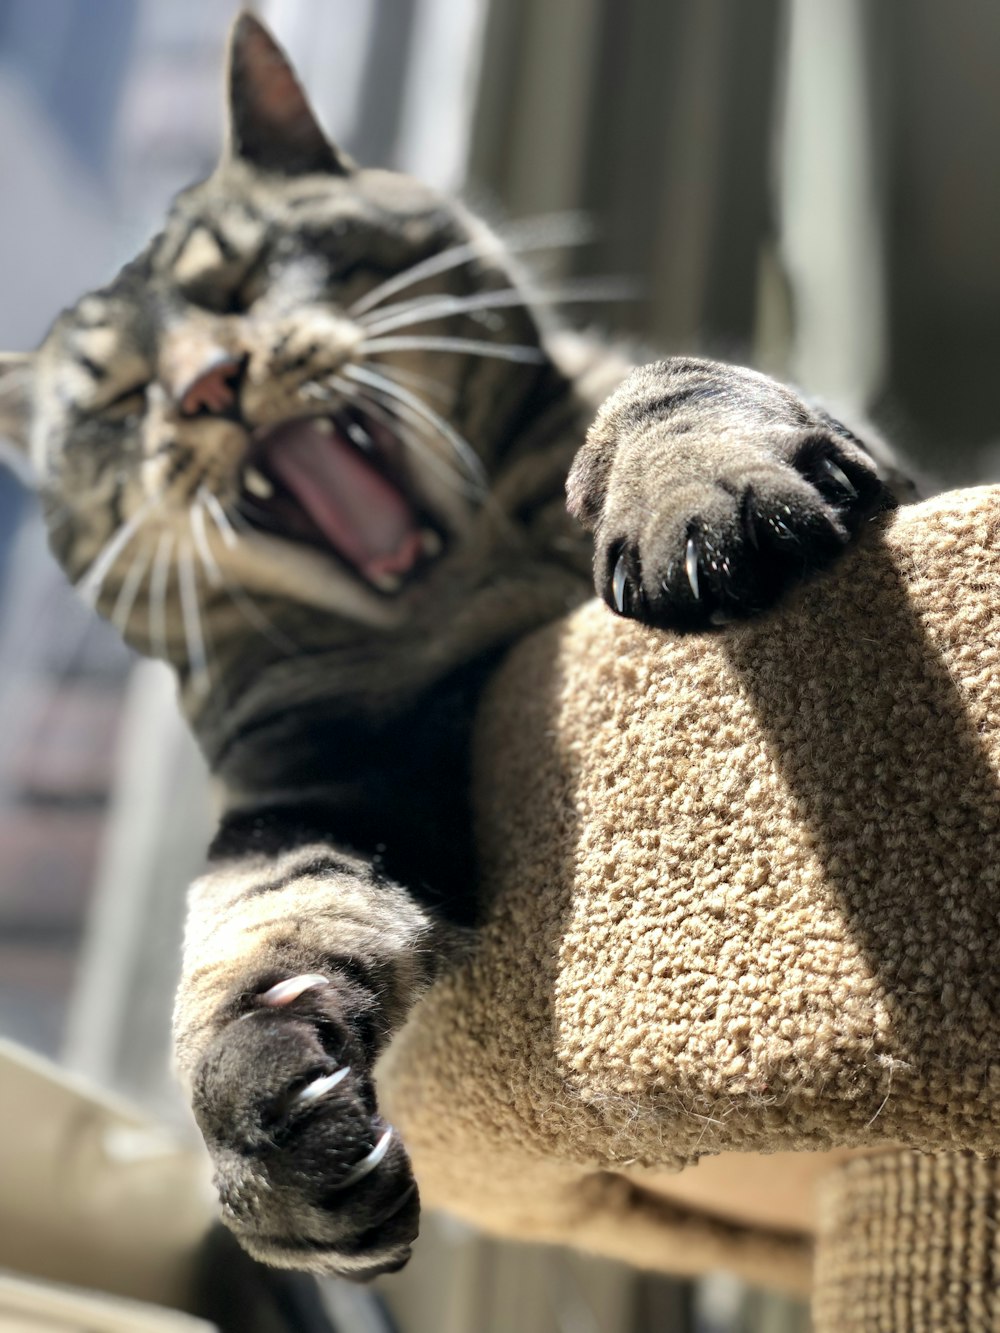  Cat  Claw  Pictures Download Free Images on Unsplash